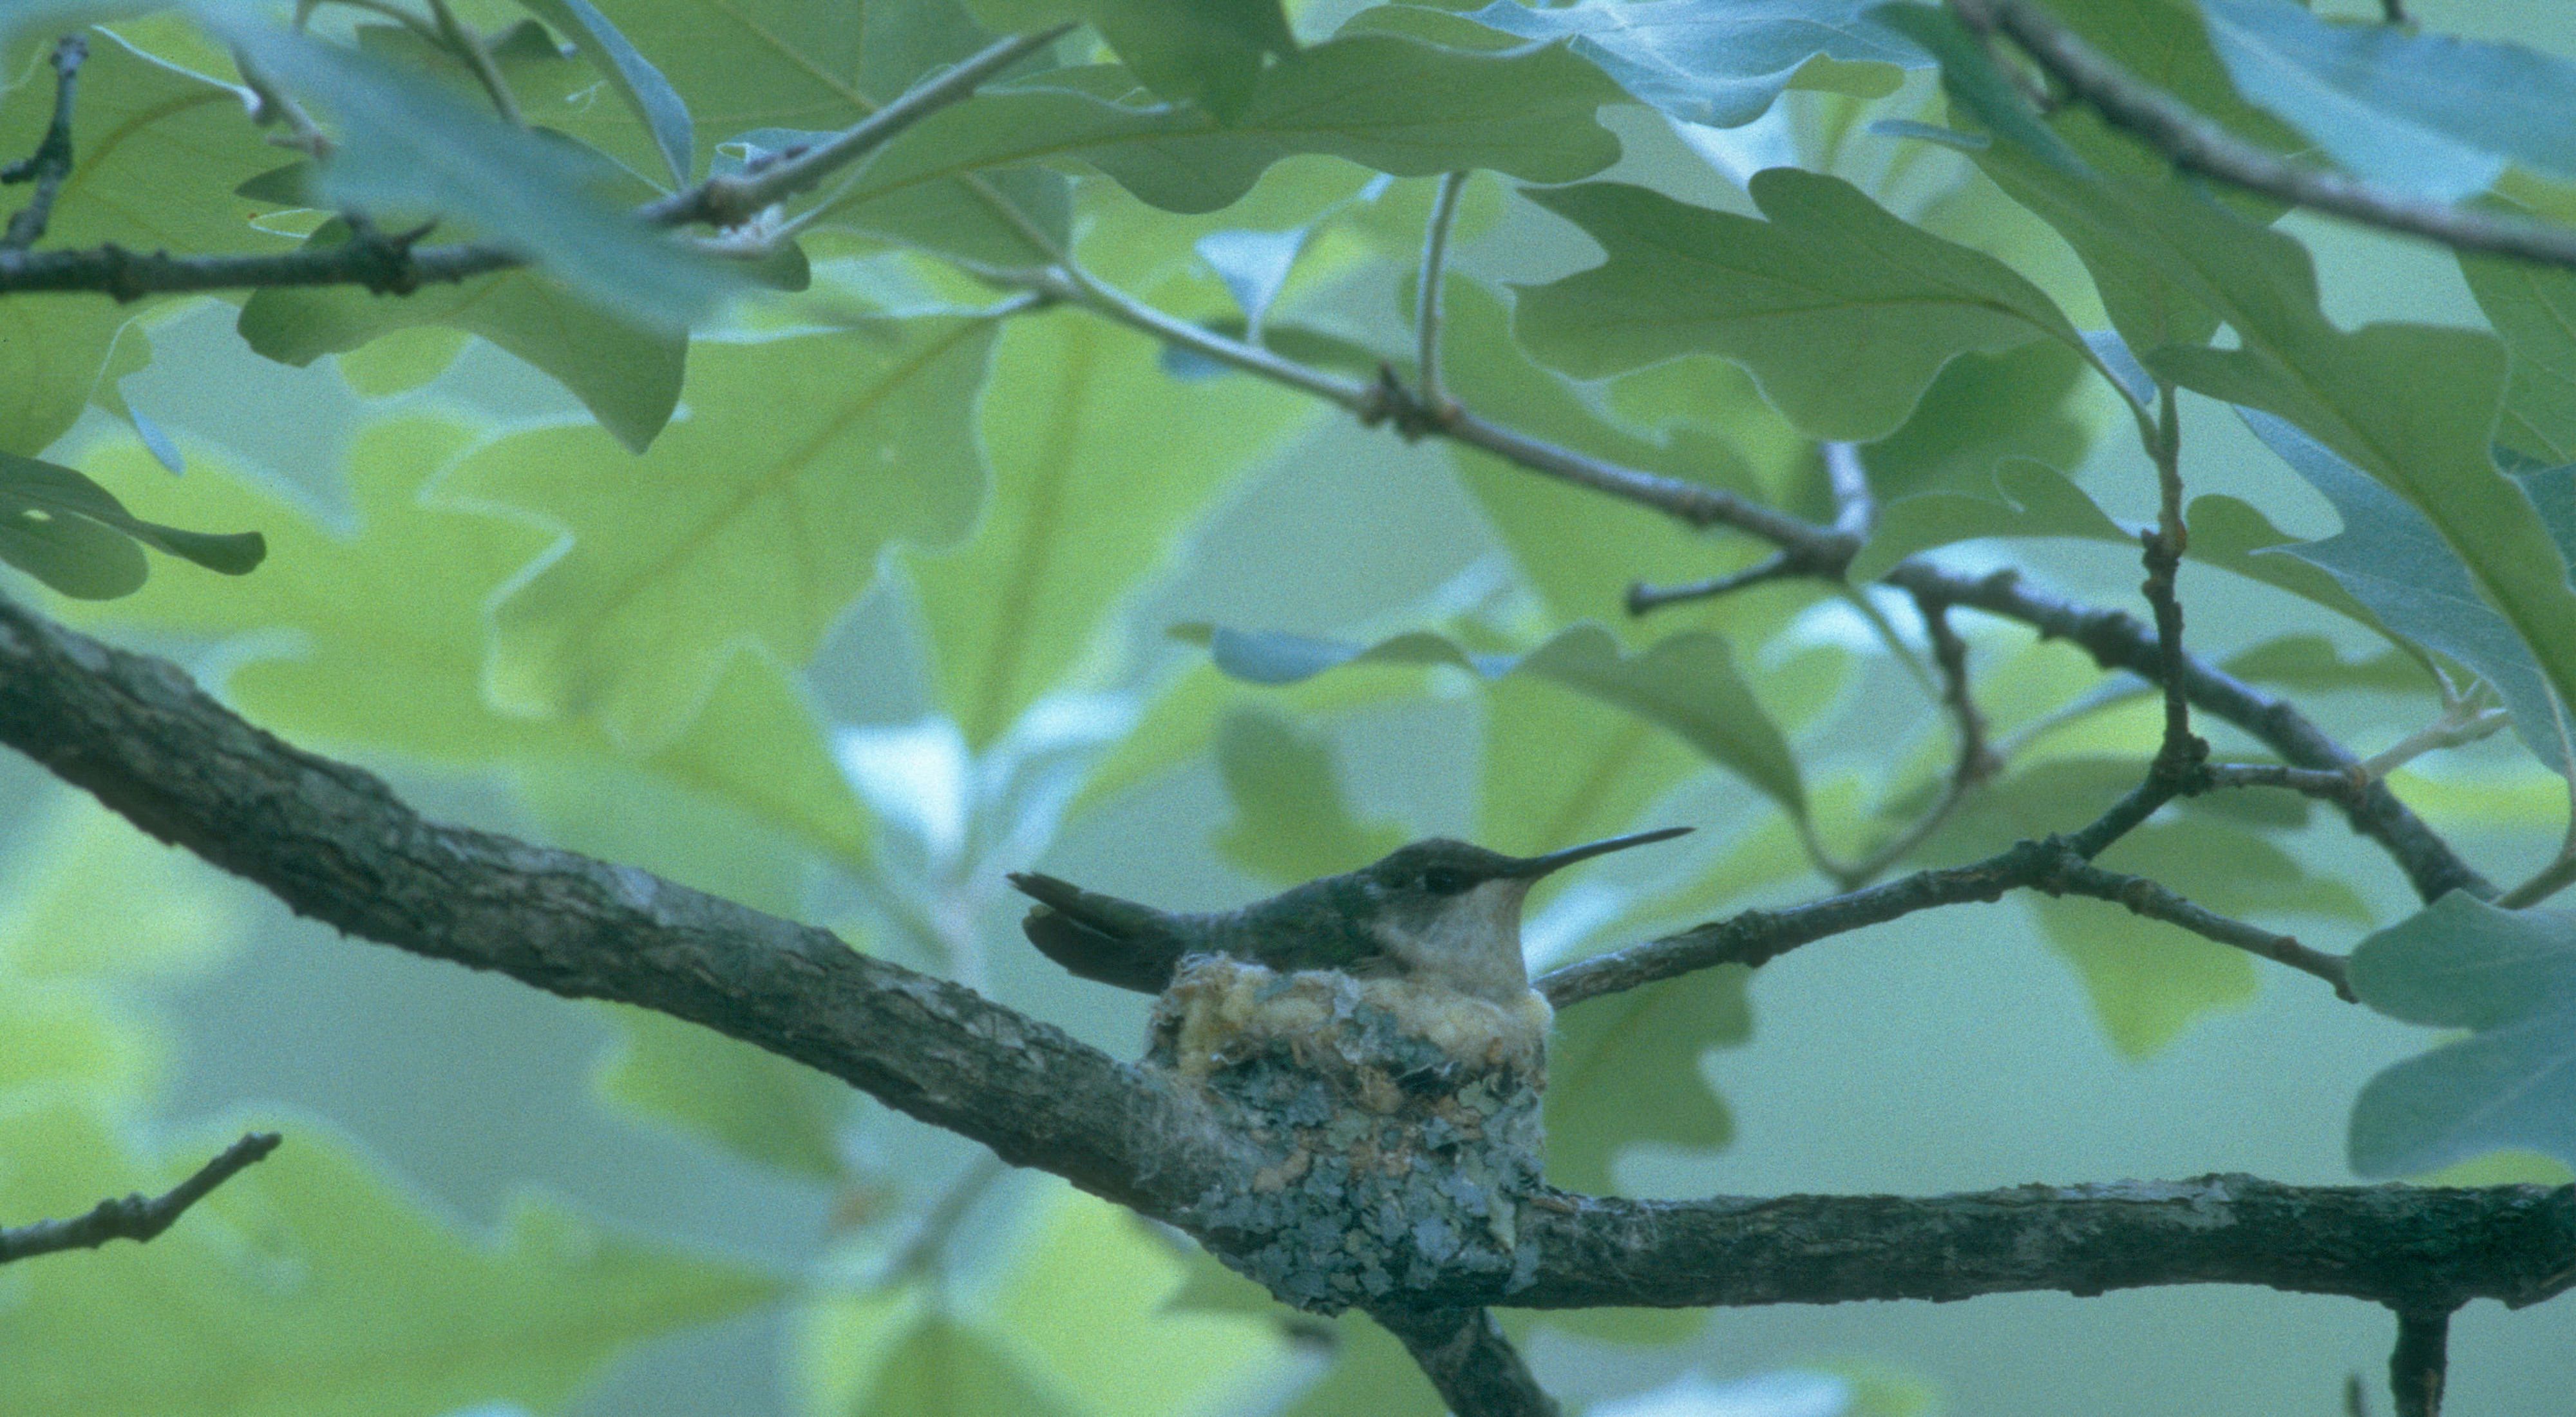 A tiny hummingbird sits in a nest cemented onto an oak tree branch.